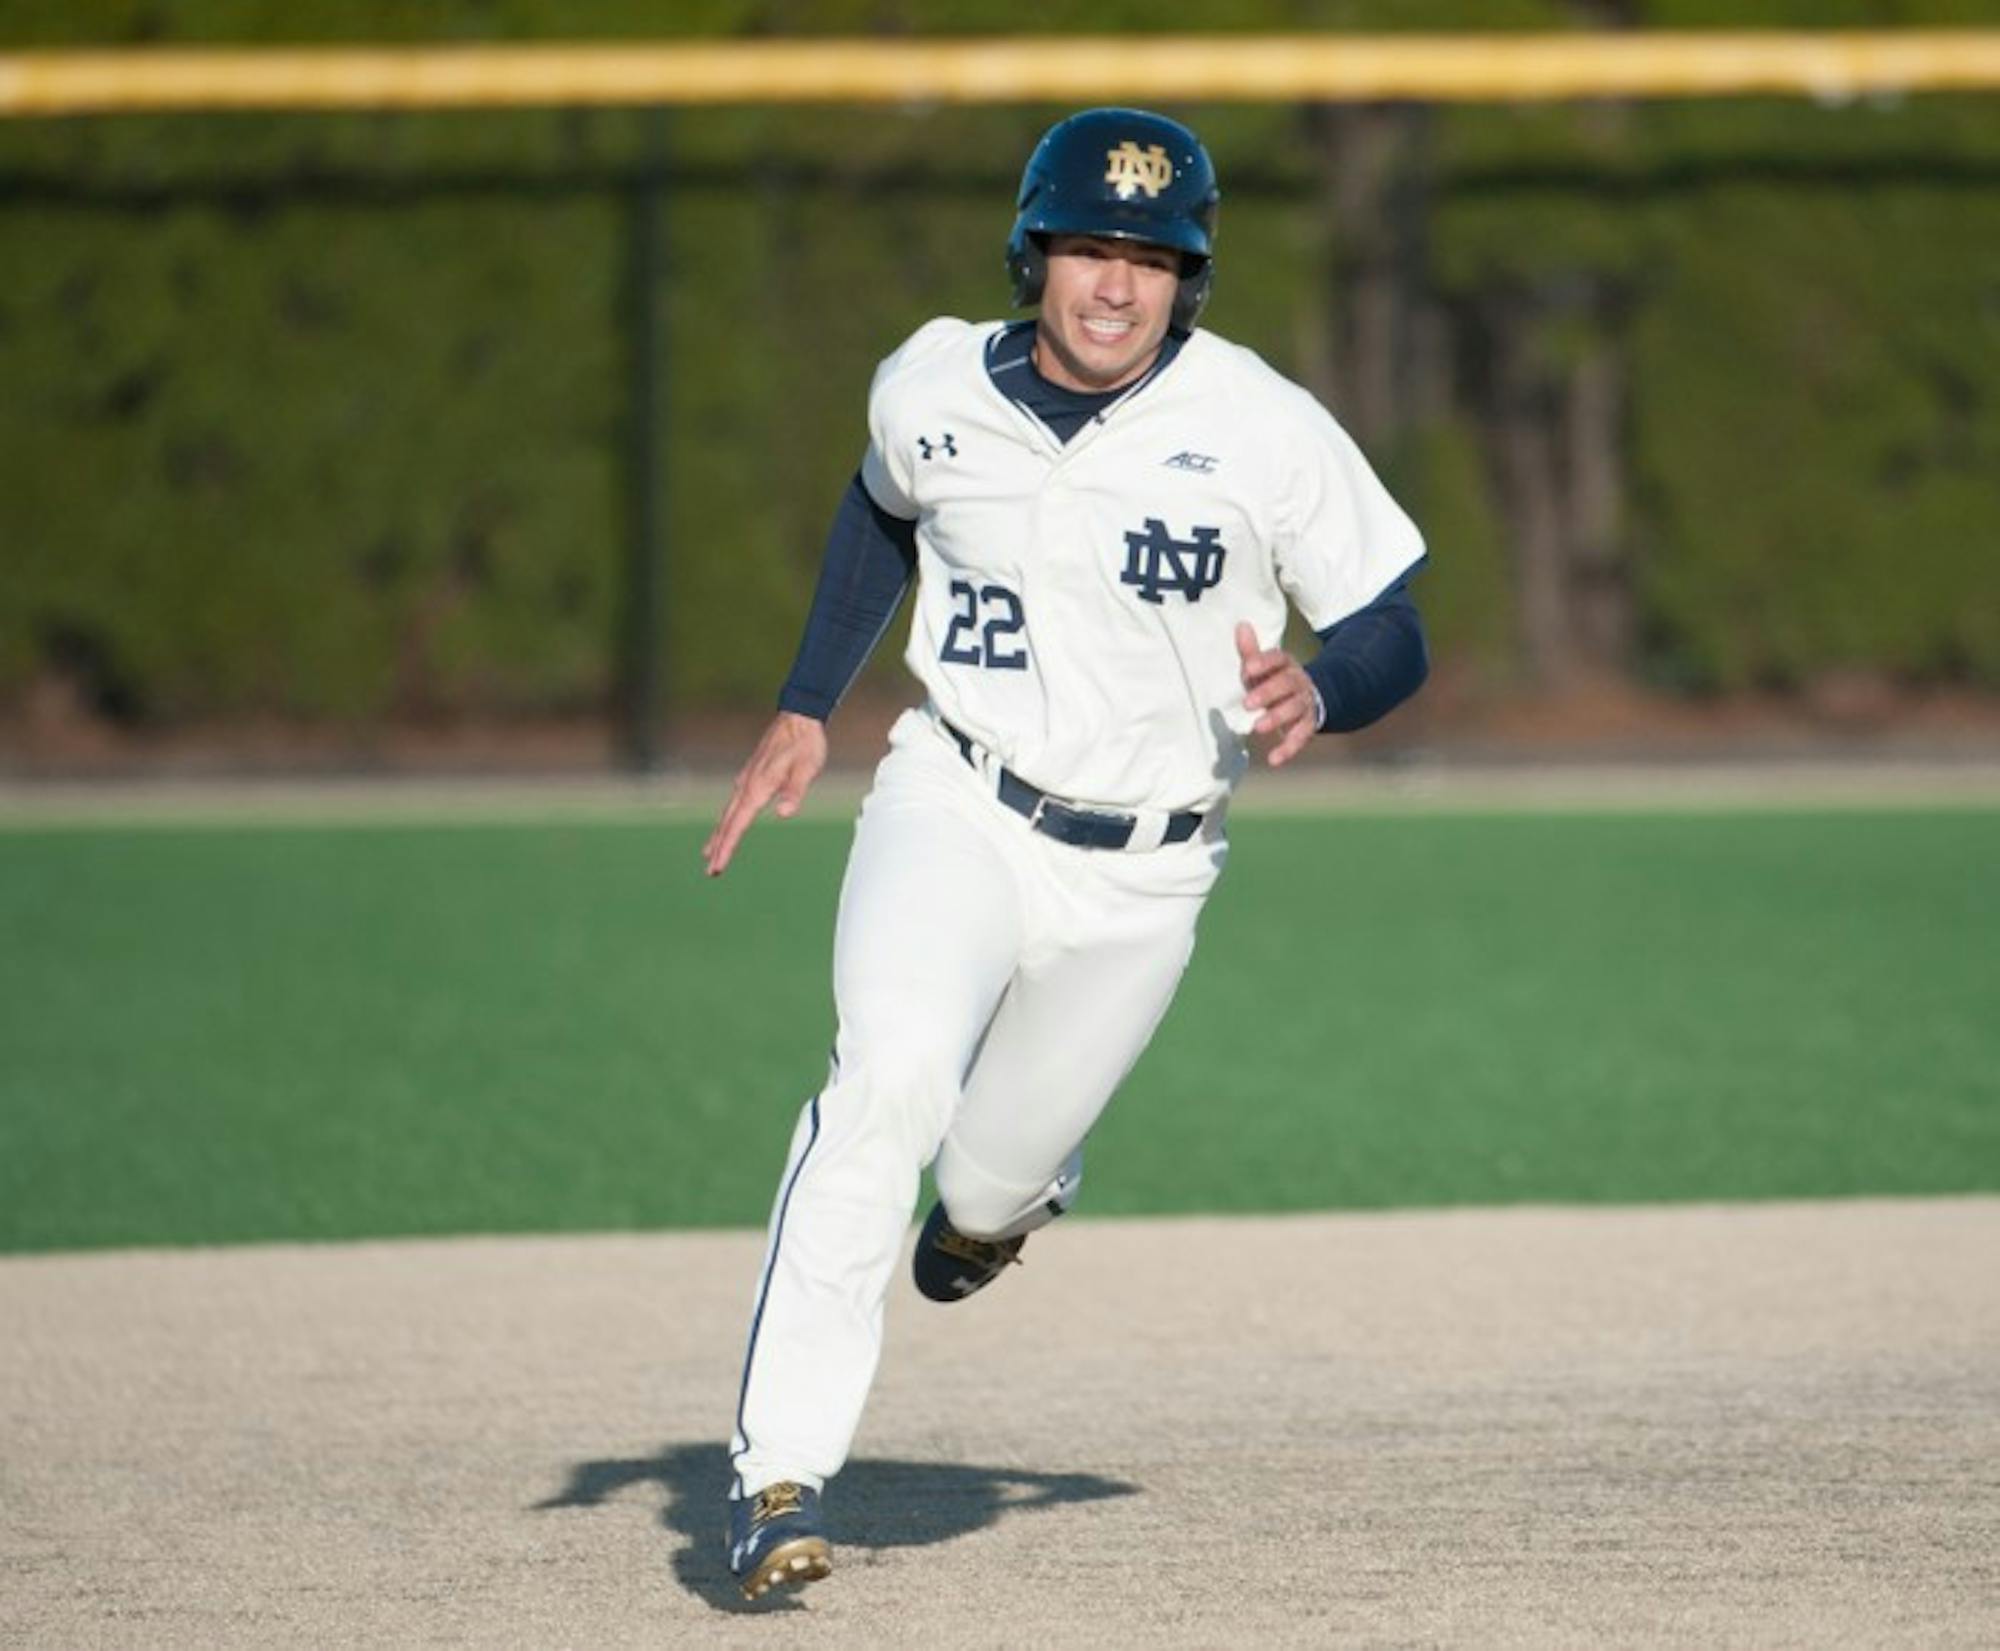 Irish senior left fielder Ricky Sanchez rounds second base during Notre Dame’s 4-1 win over Boston College on Friday at Frank Eck Stadium. Sanchez leads Notre Dame with a .344 batting average.